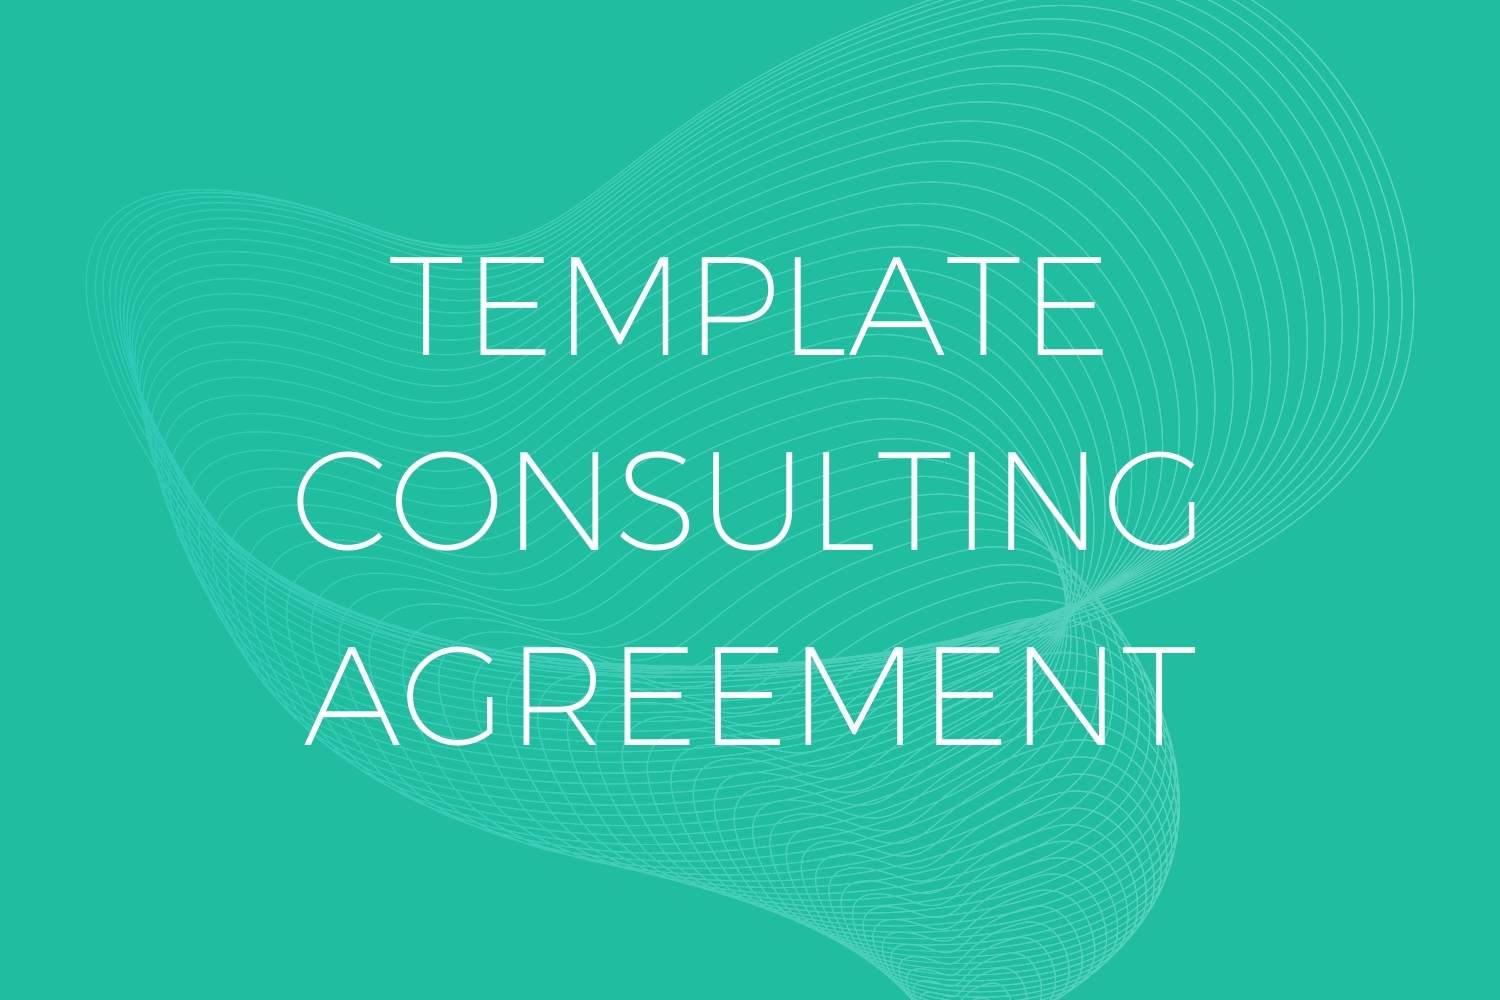 Template Consulting Agreement